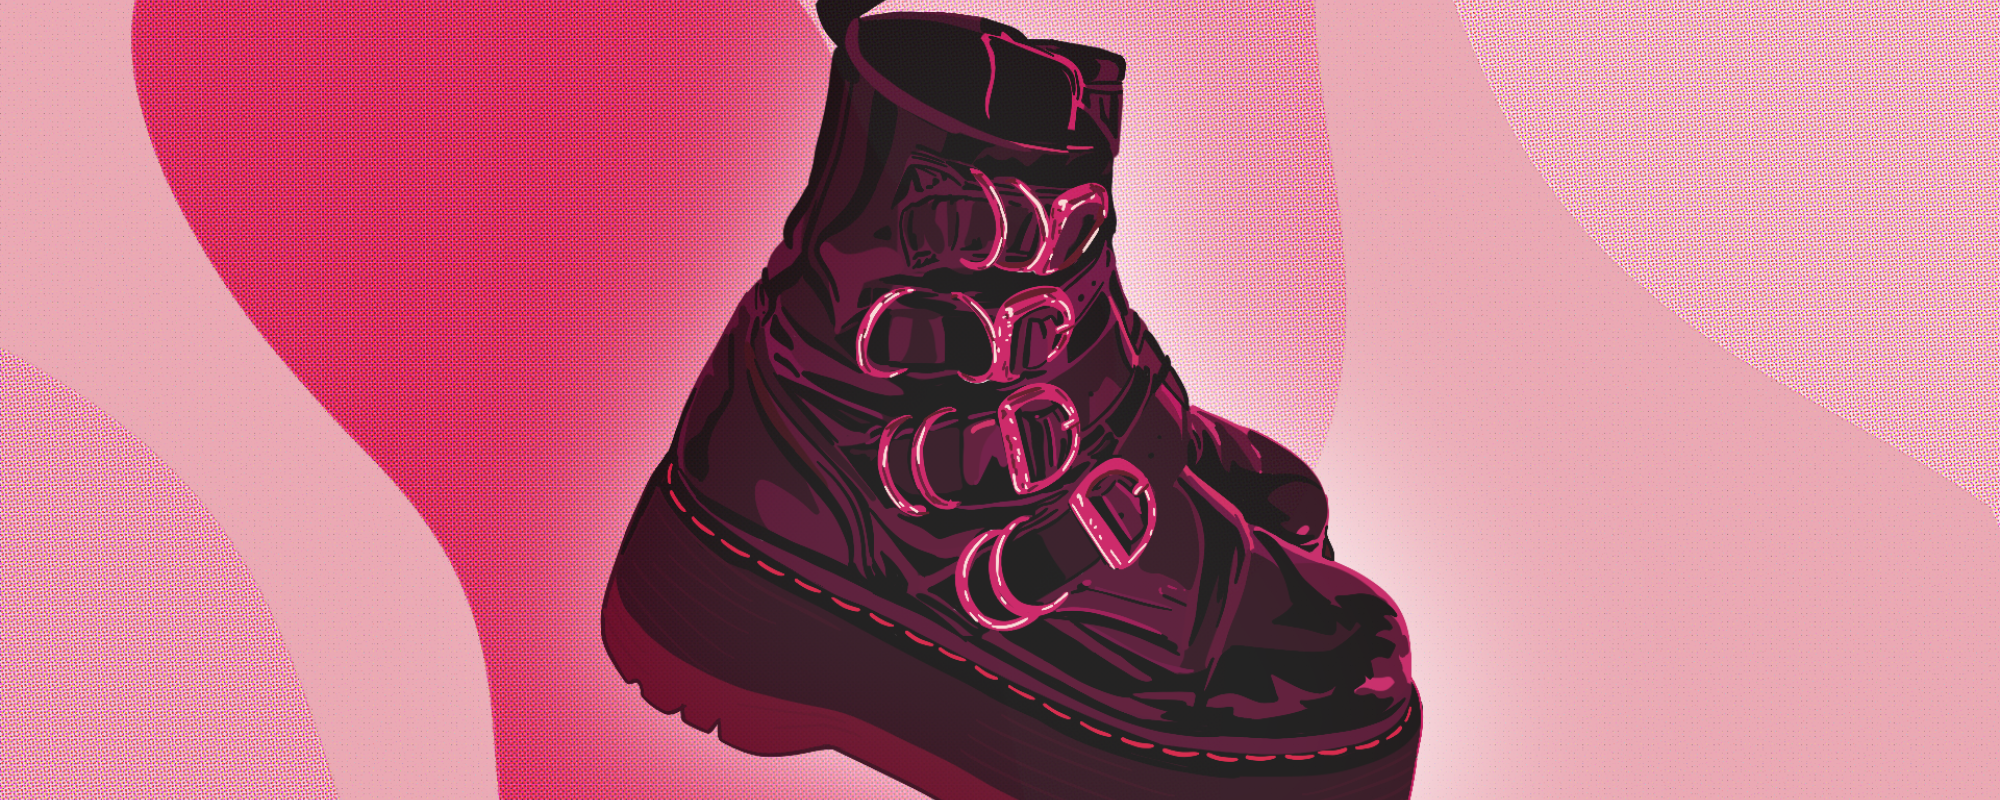 boots and pink background